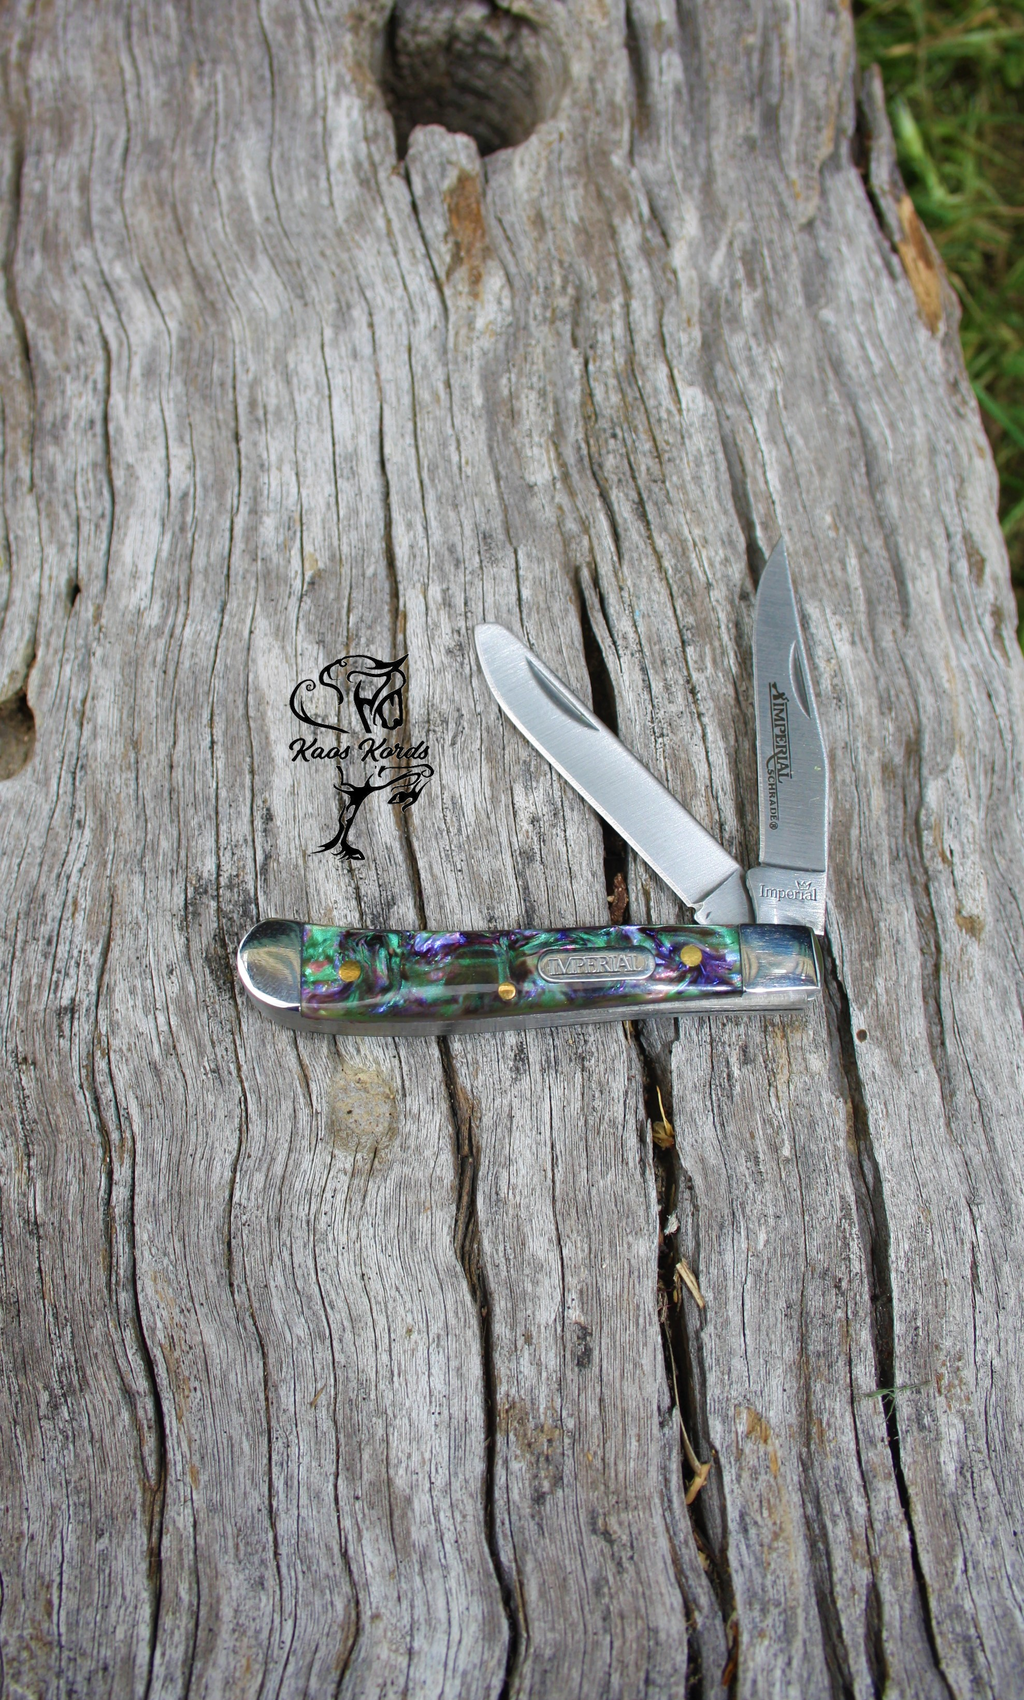 Imperial small trapper knife